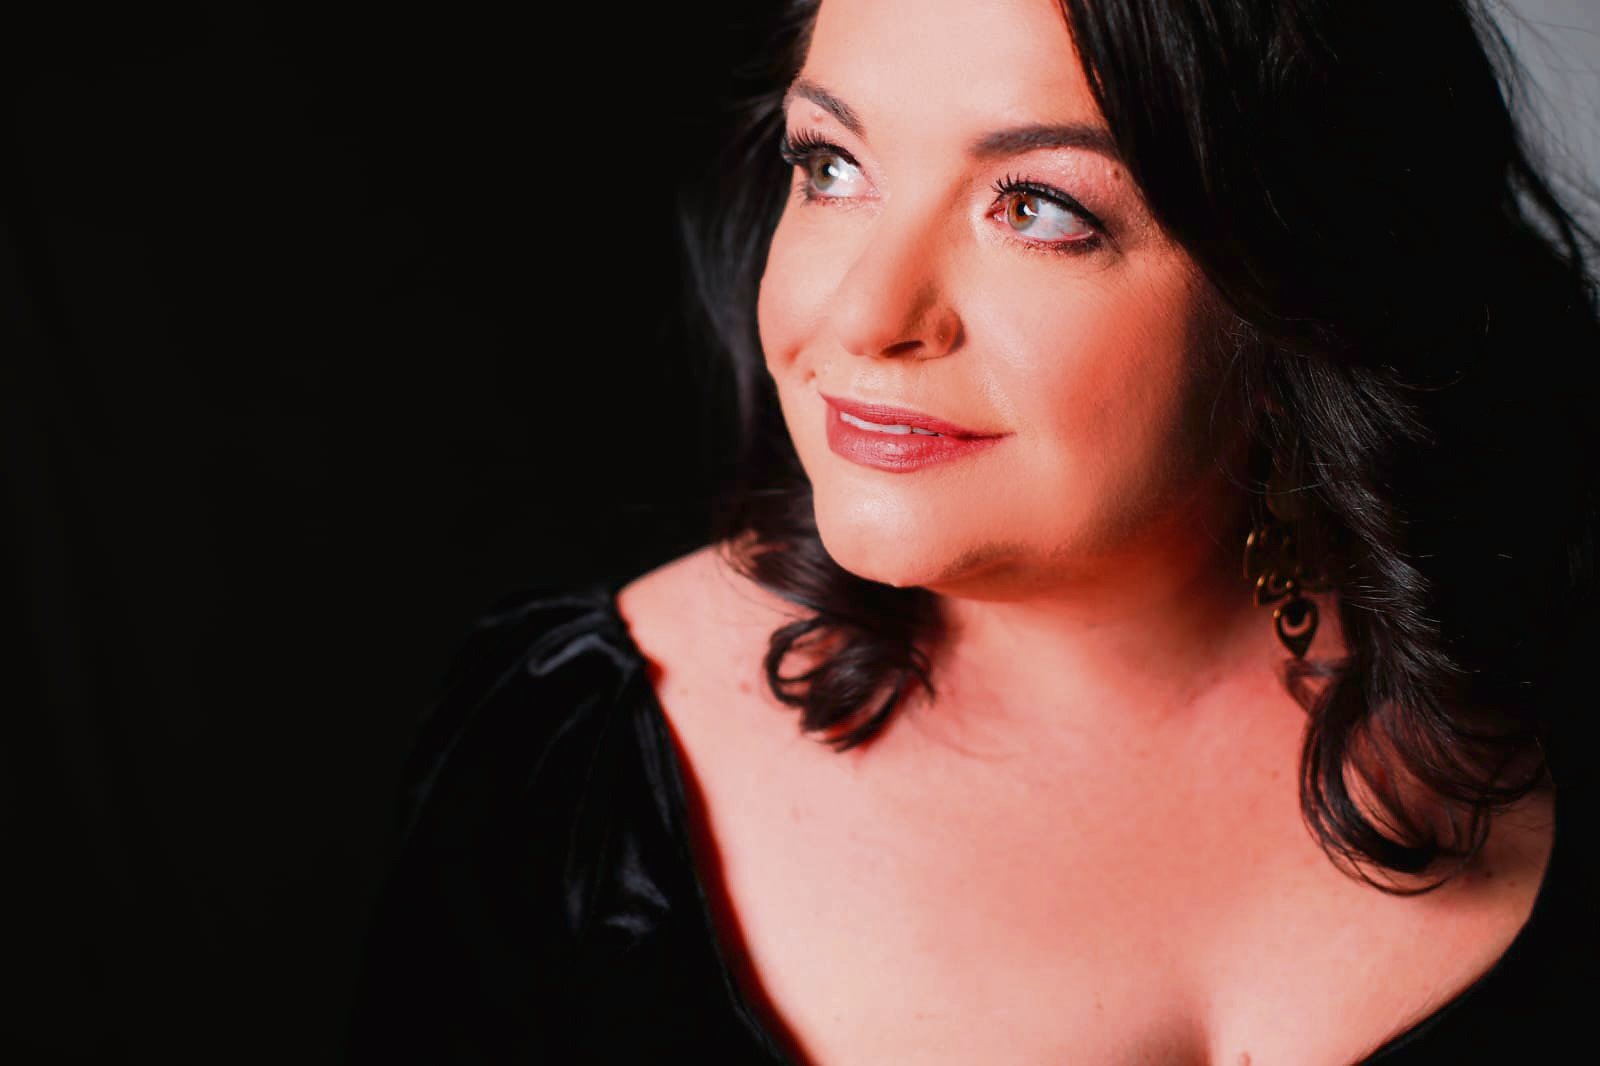 Teresa de Wit is a mezzo-soprano who regularly performs in operas and oratorios in various concert halls in South Africa. She is an instructor in singing at the Kimberley Academy of Music (KAM) and the Odeion School of Music (OSM).Photos: Supplied